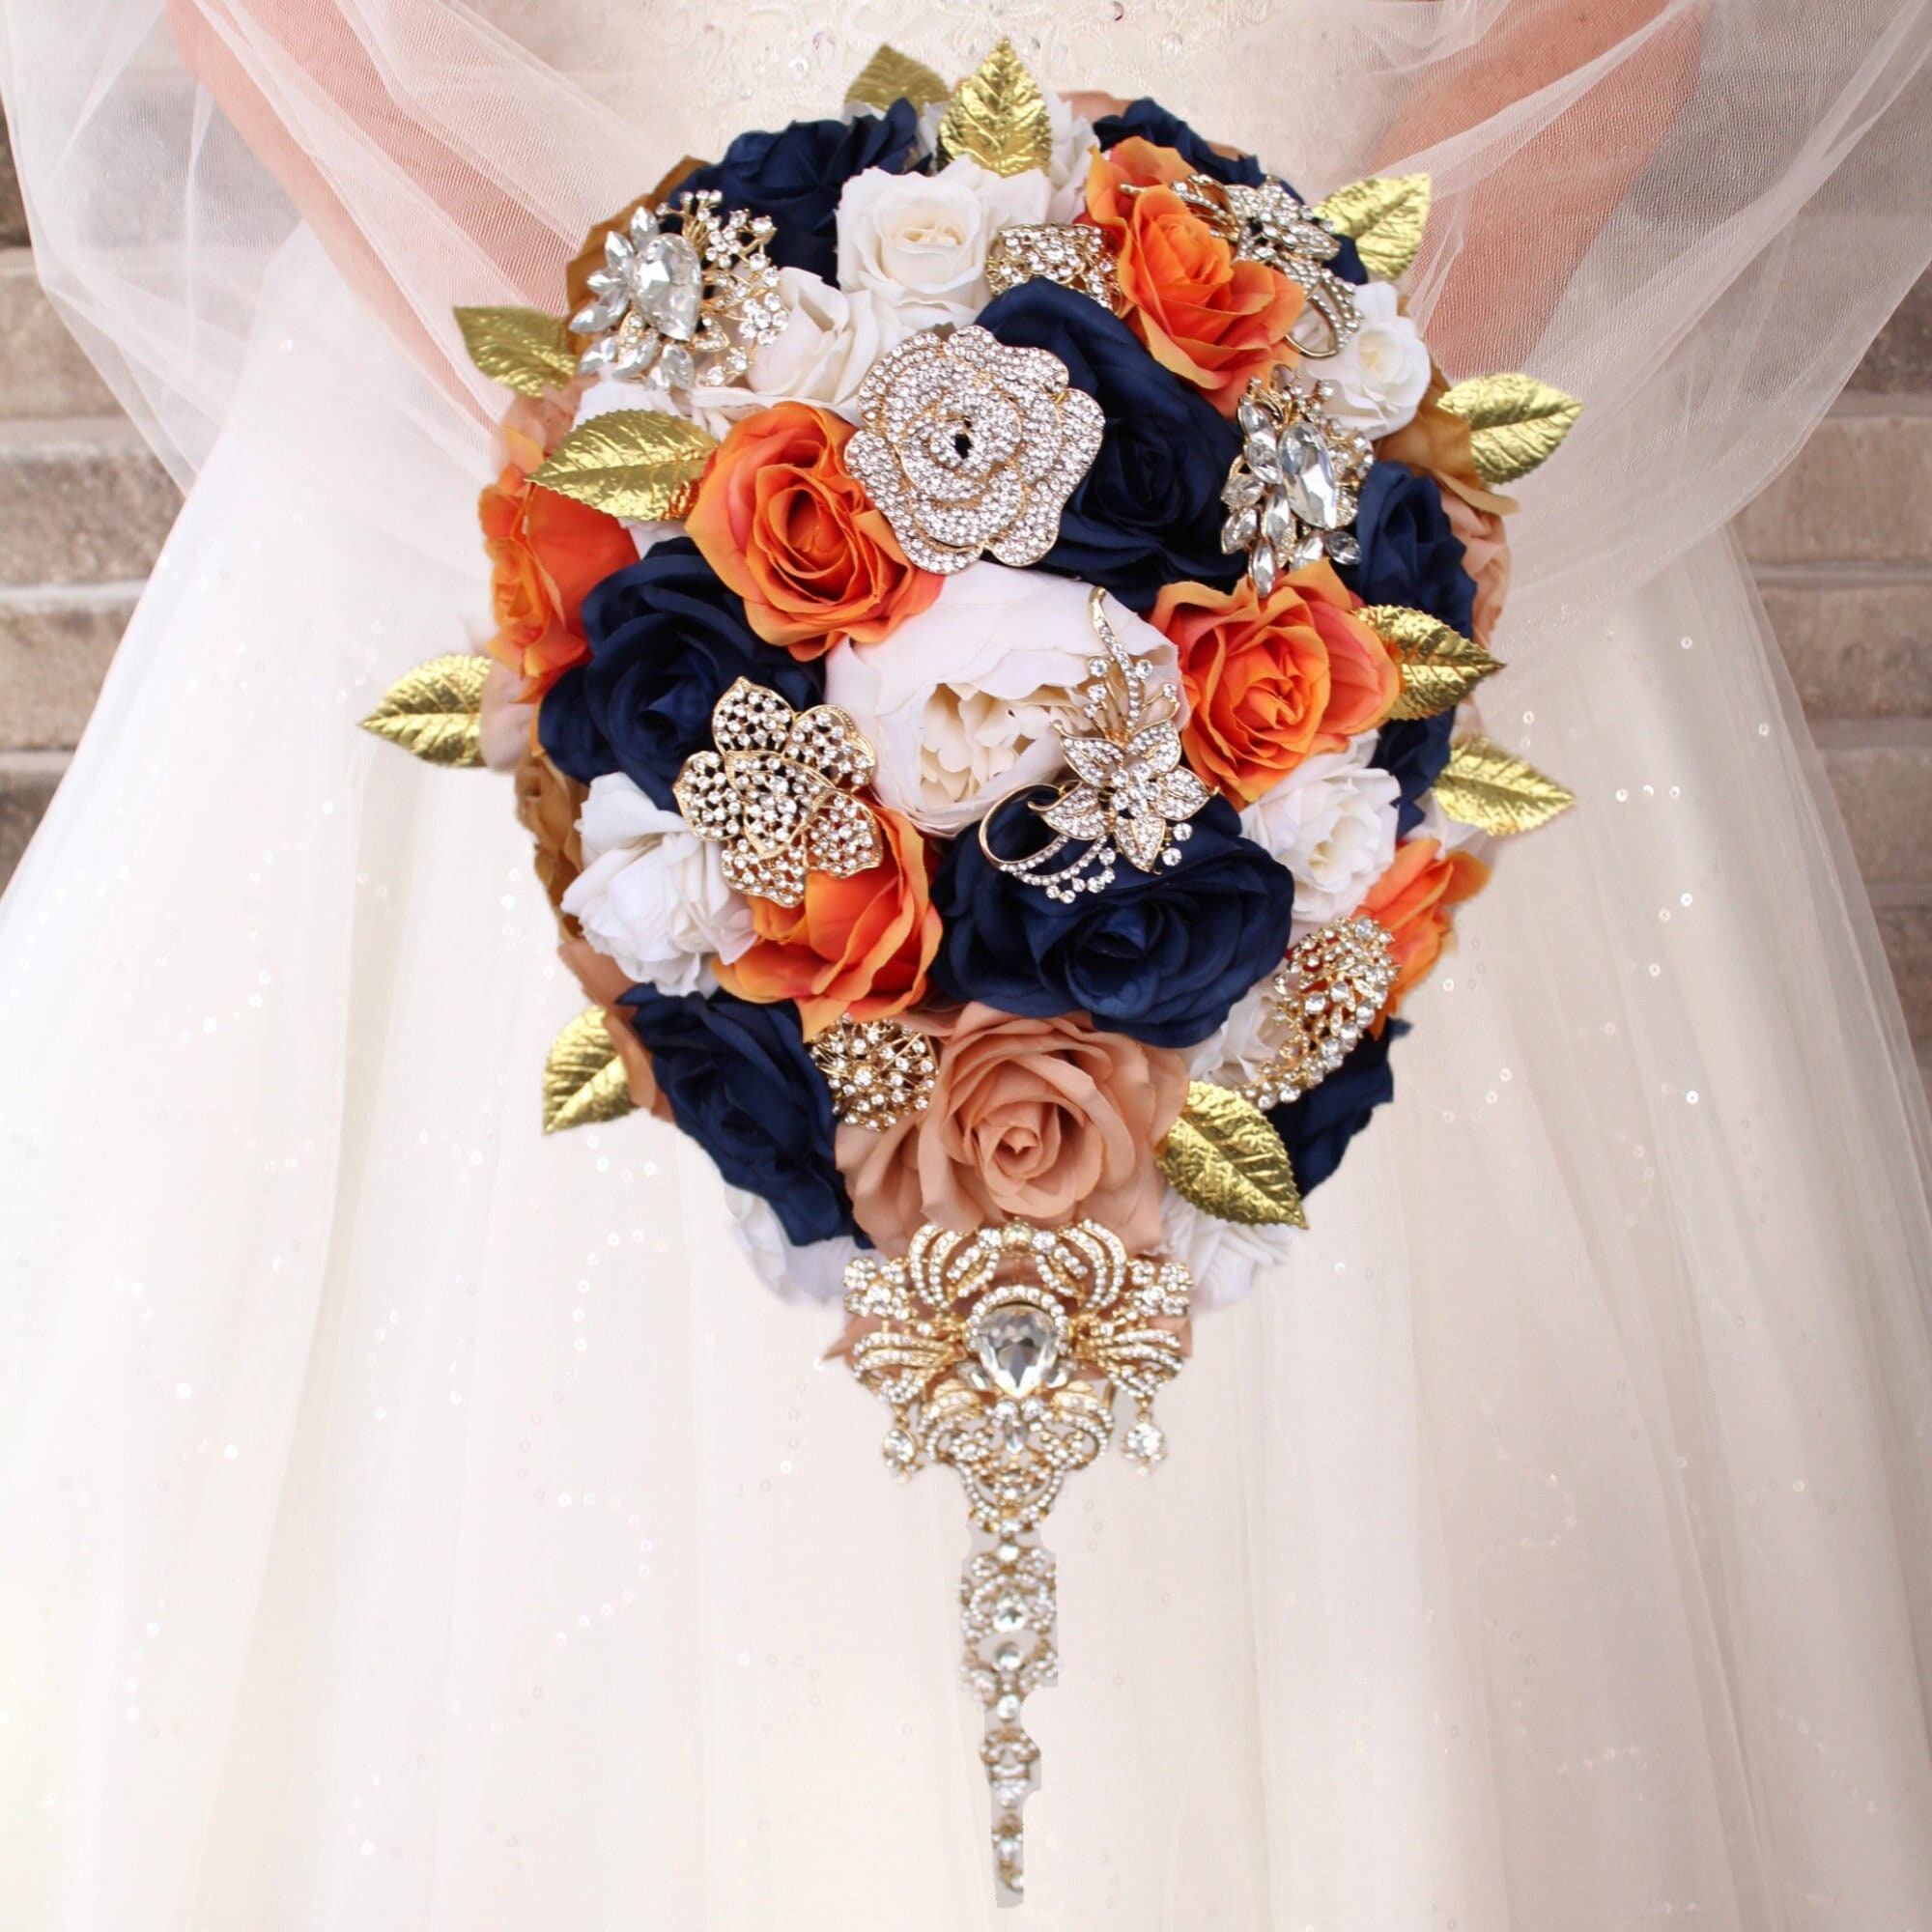 Navy Blue White Cascade Bridal Bouquet Real Touch Callas Roses Rhinestones  Add Boutonniere Bridesmaid Bouquet Crown Cake Flowers & More 